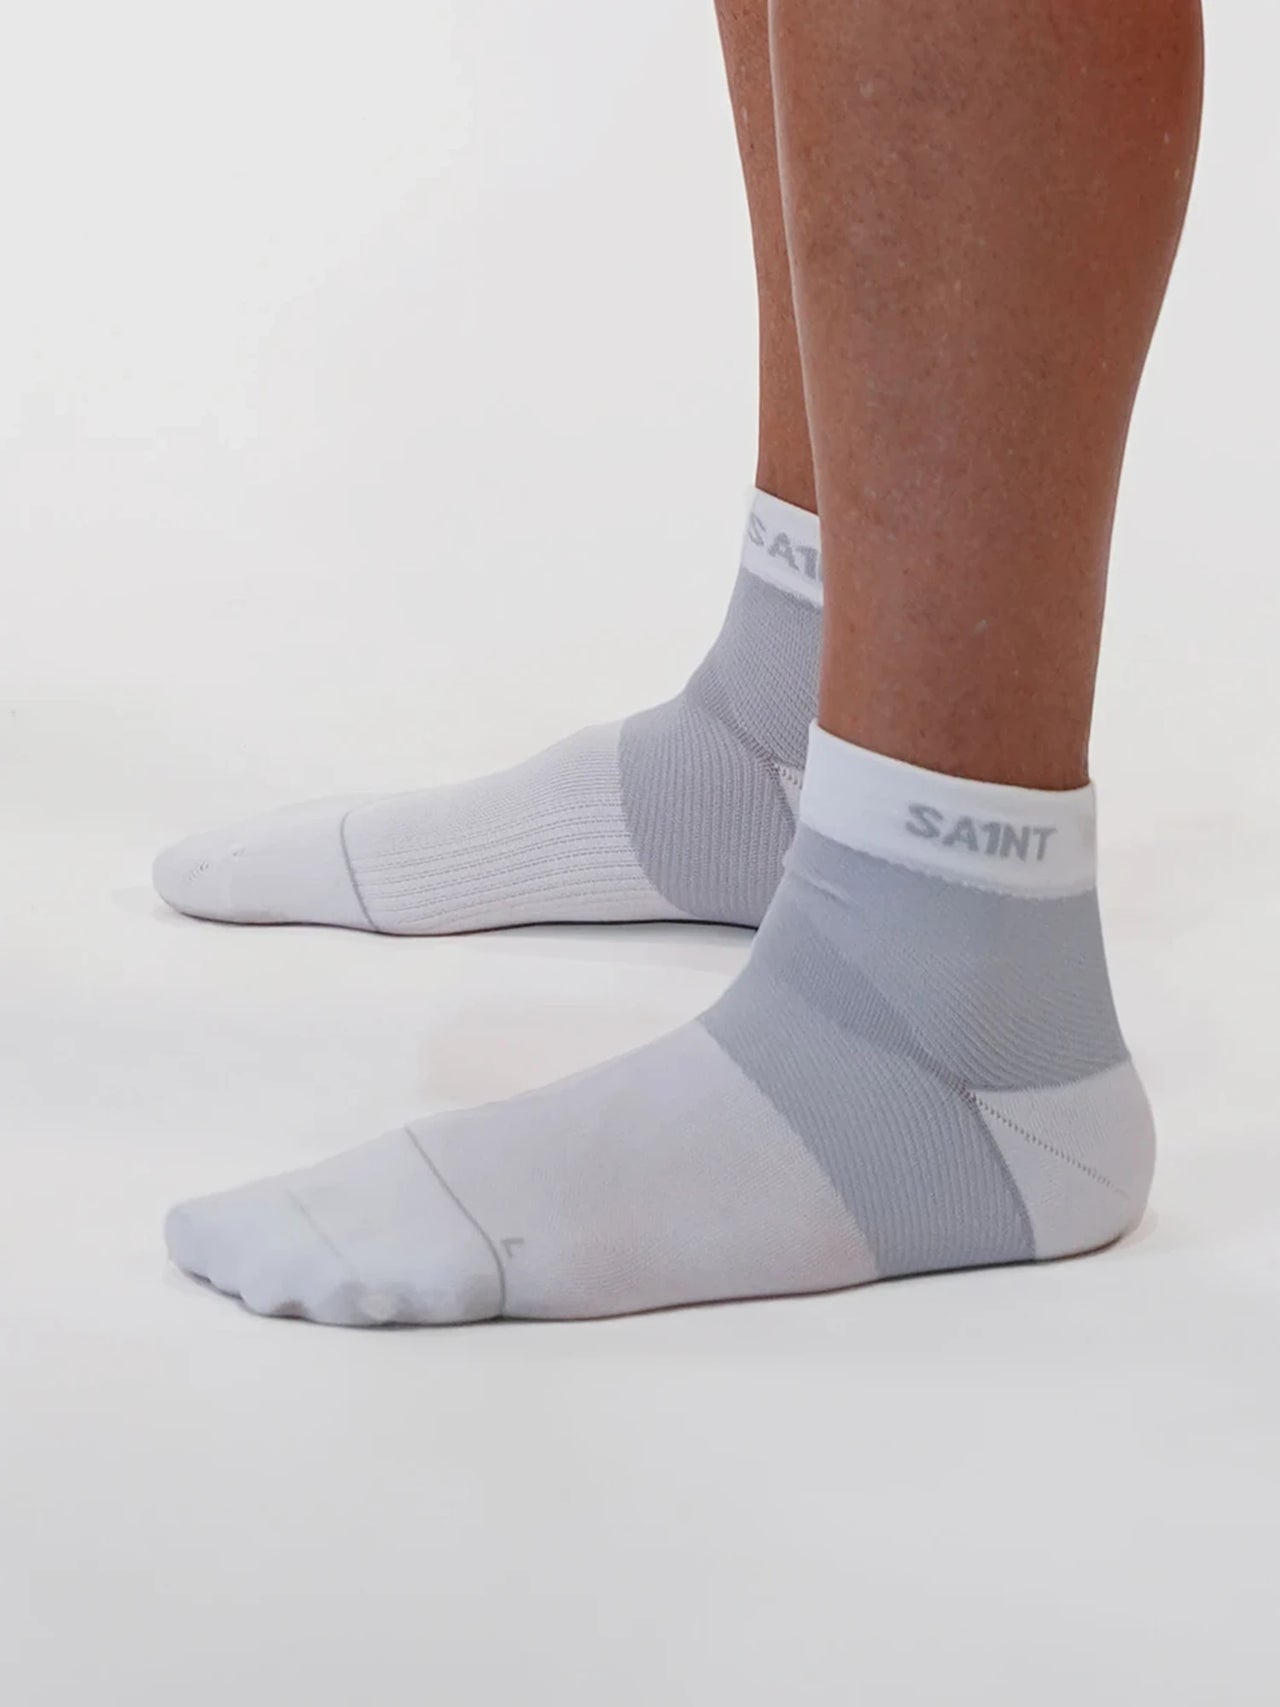 Low-Cut Ankle Support Socks - White